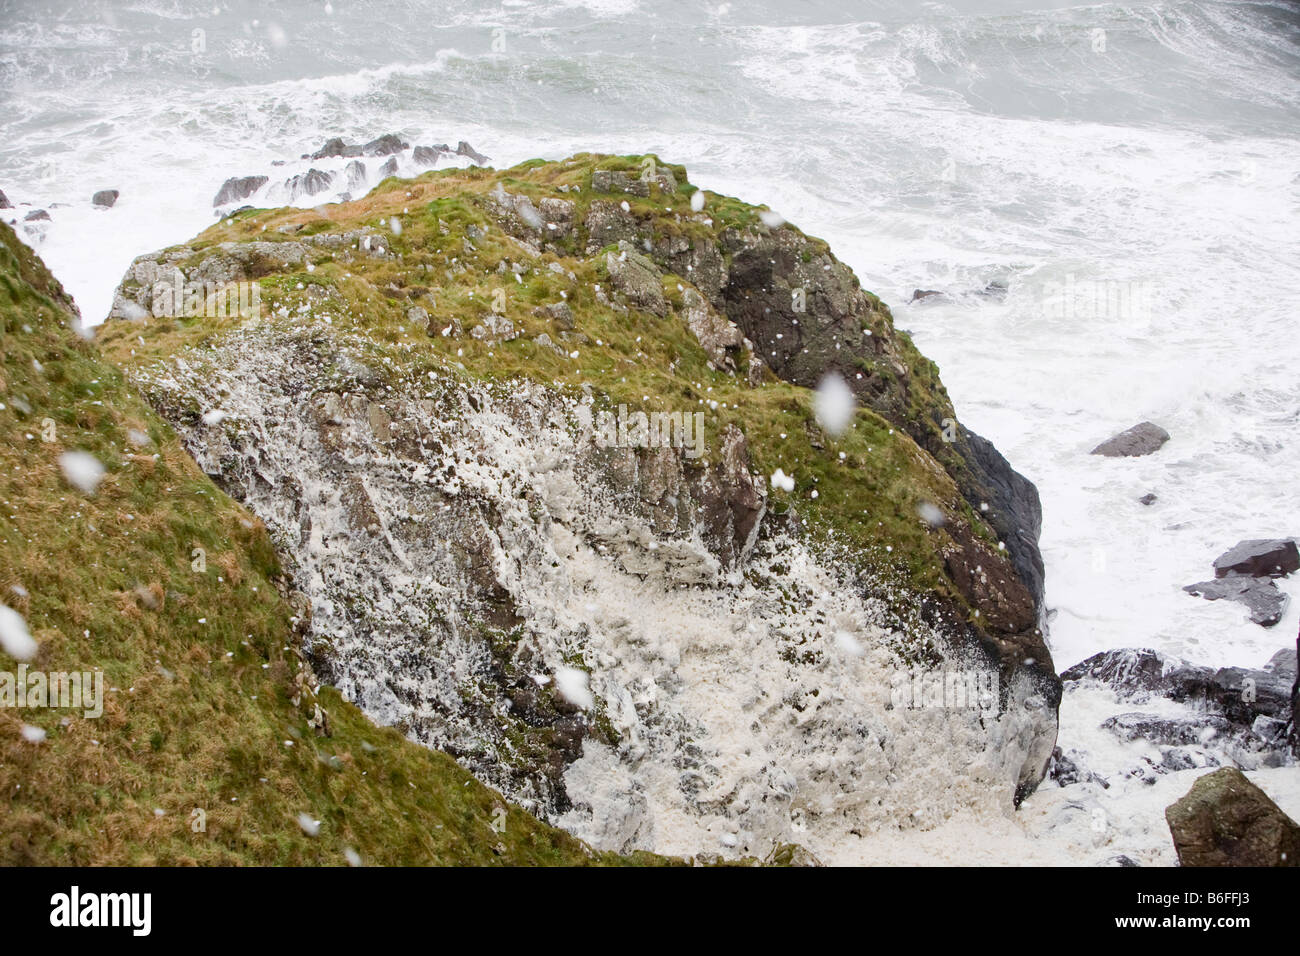 Spume blown inland from a stormy sea on The Rhins of Galloway Scotland UK Stock Photo